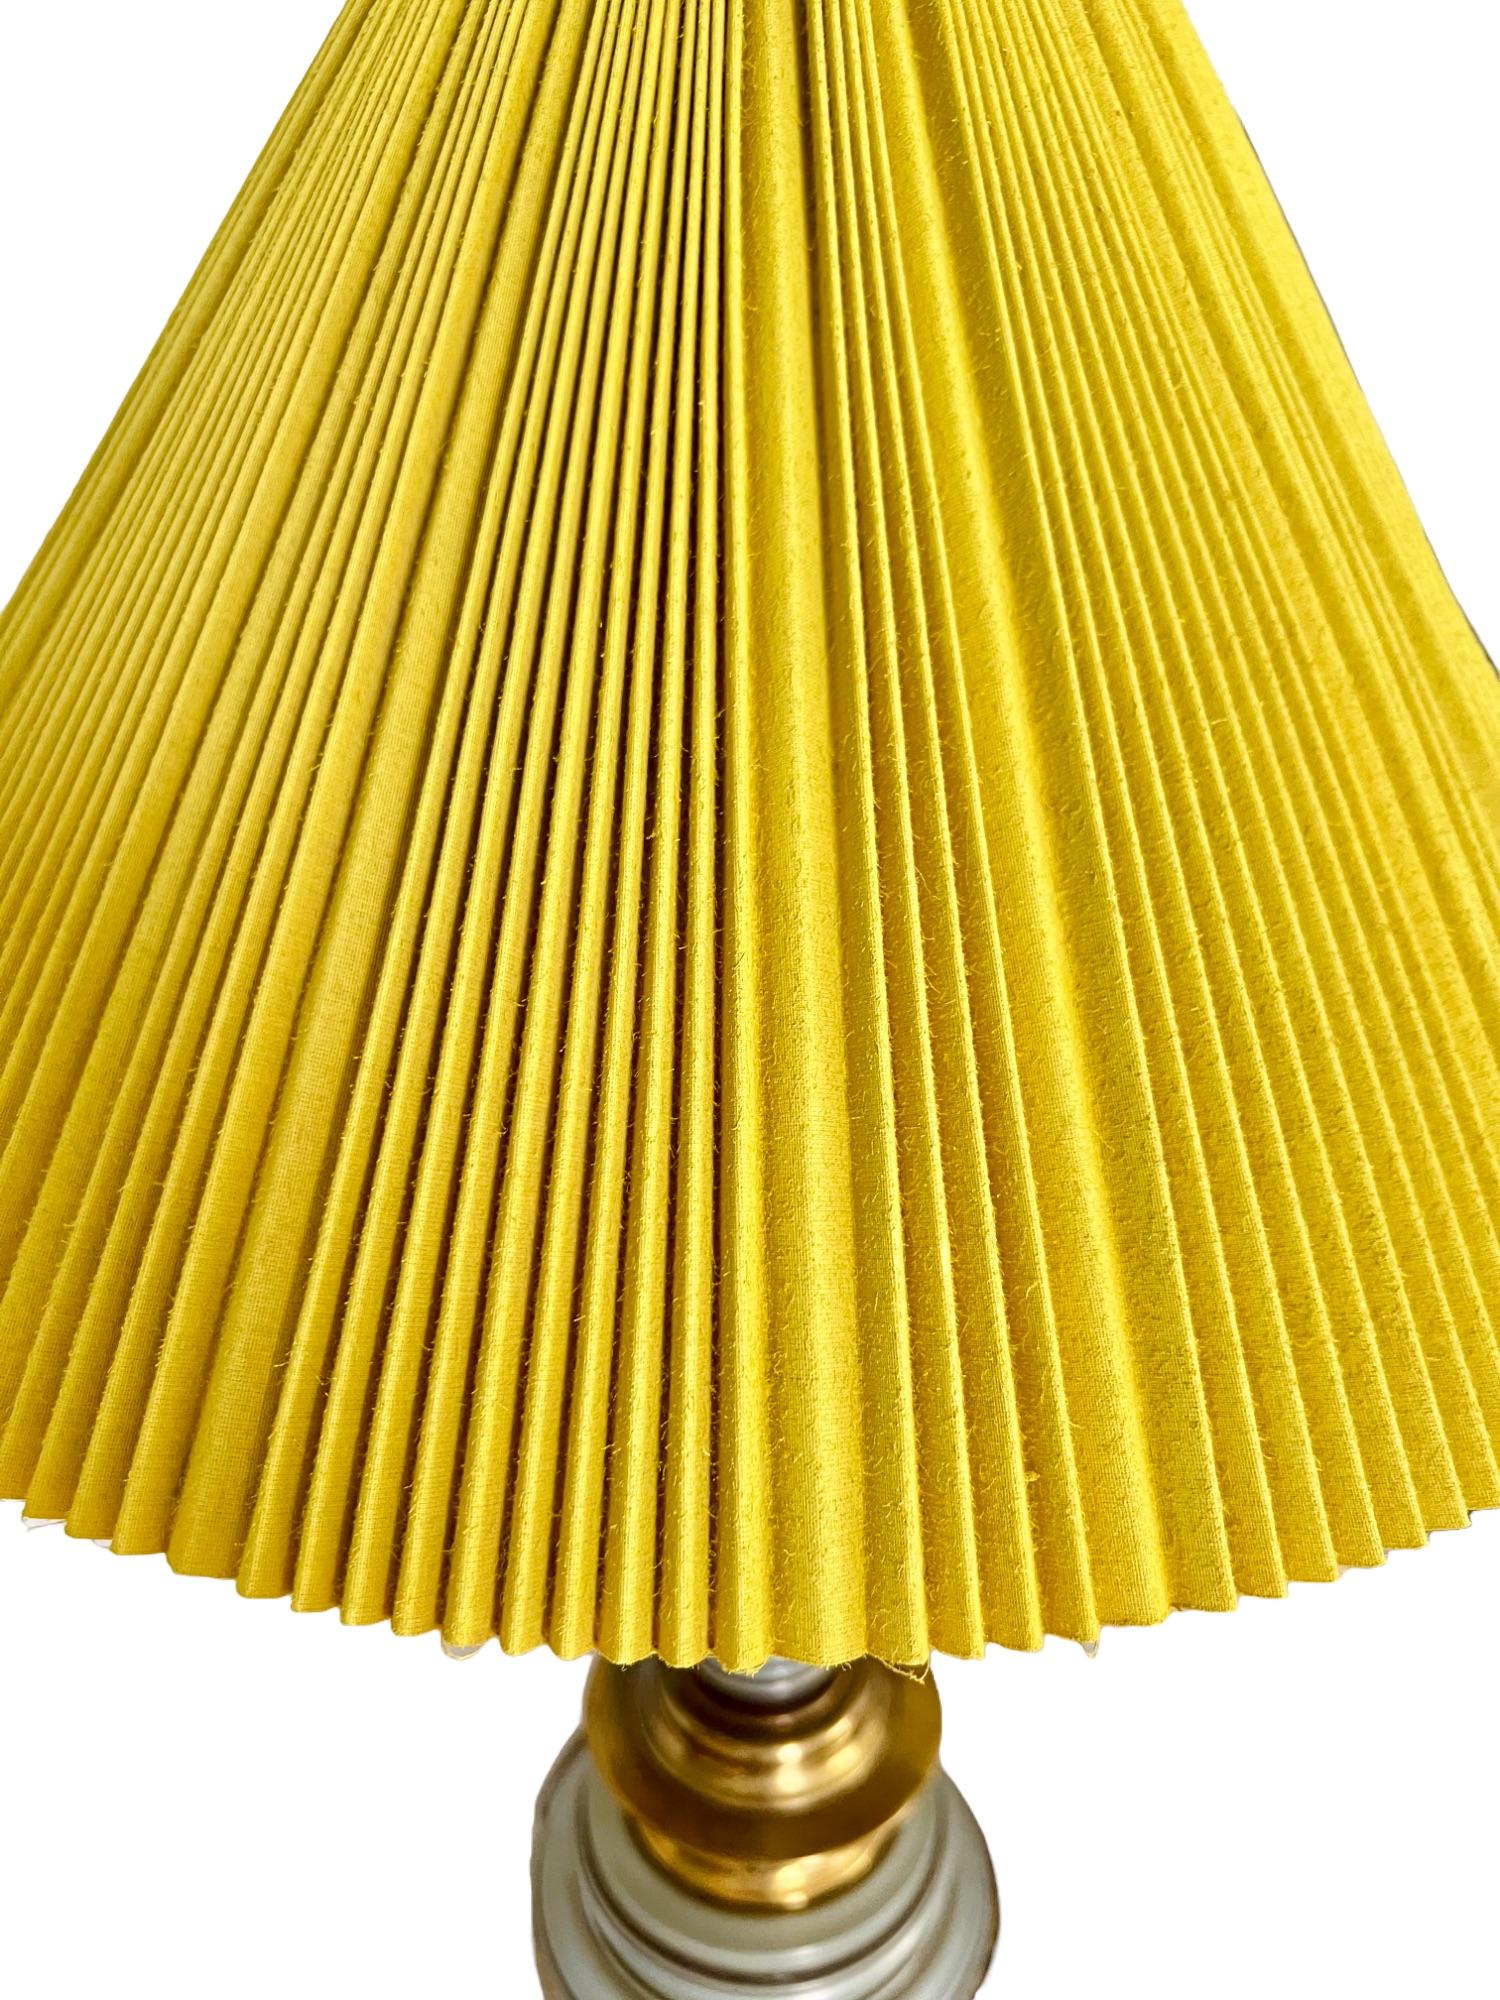 Hollywood Regency Enamel & Brass Lamps with Yellow Shades, a Pair 4